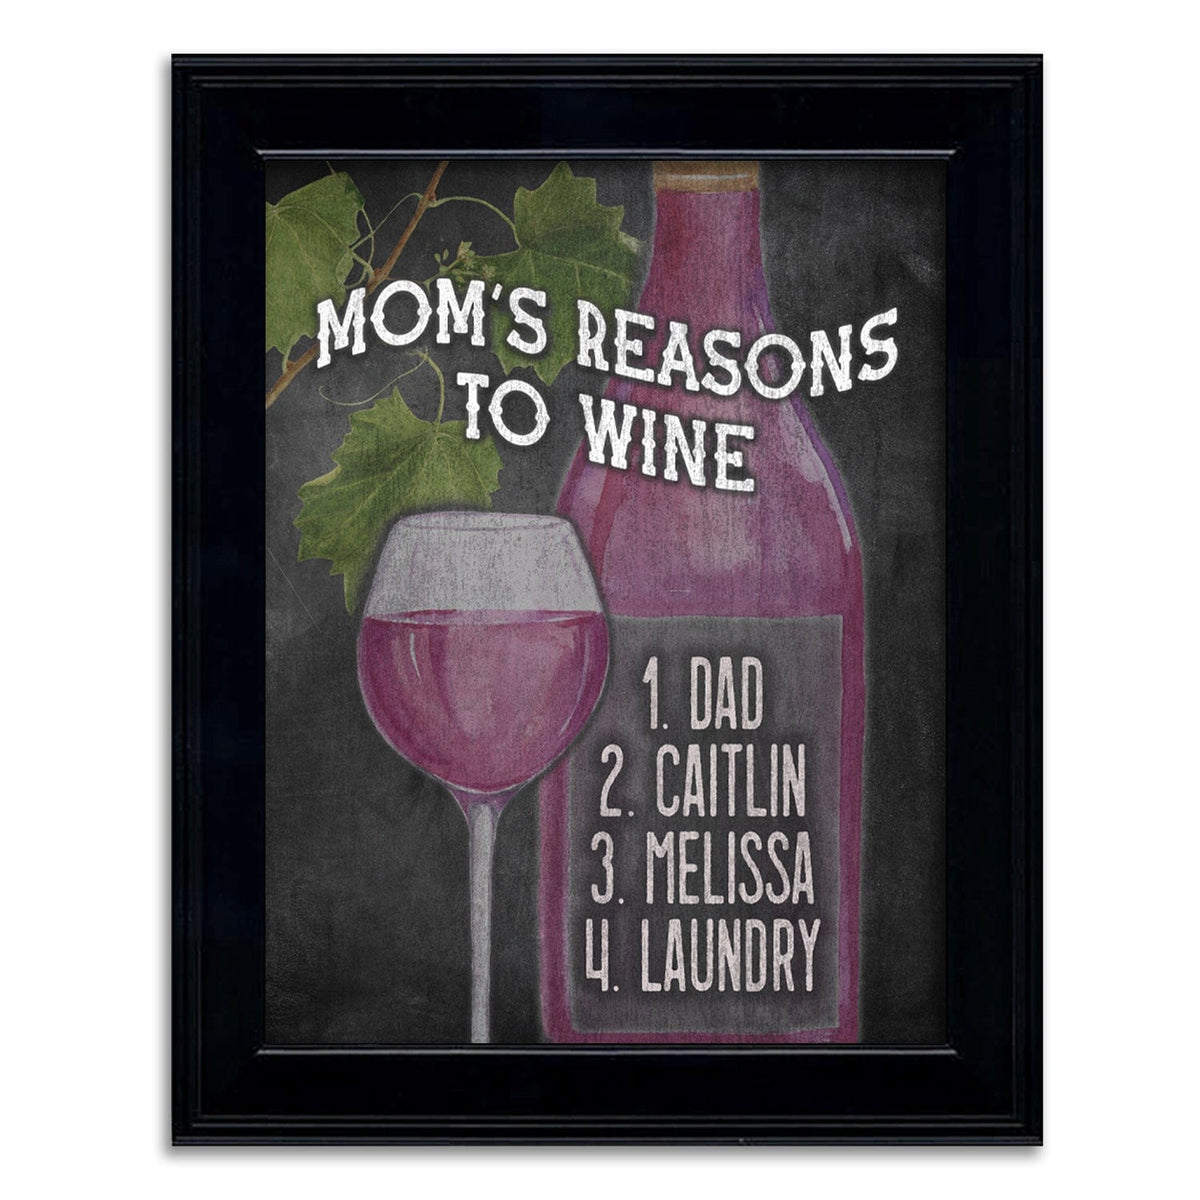 Funny gift for mom - personalized framed art from Personal Prints